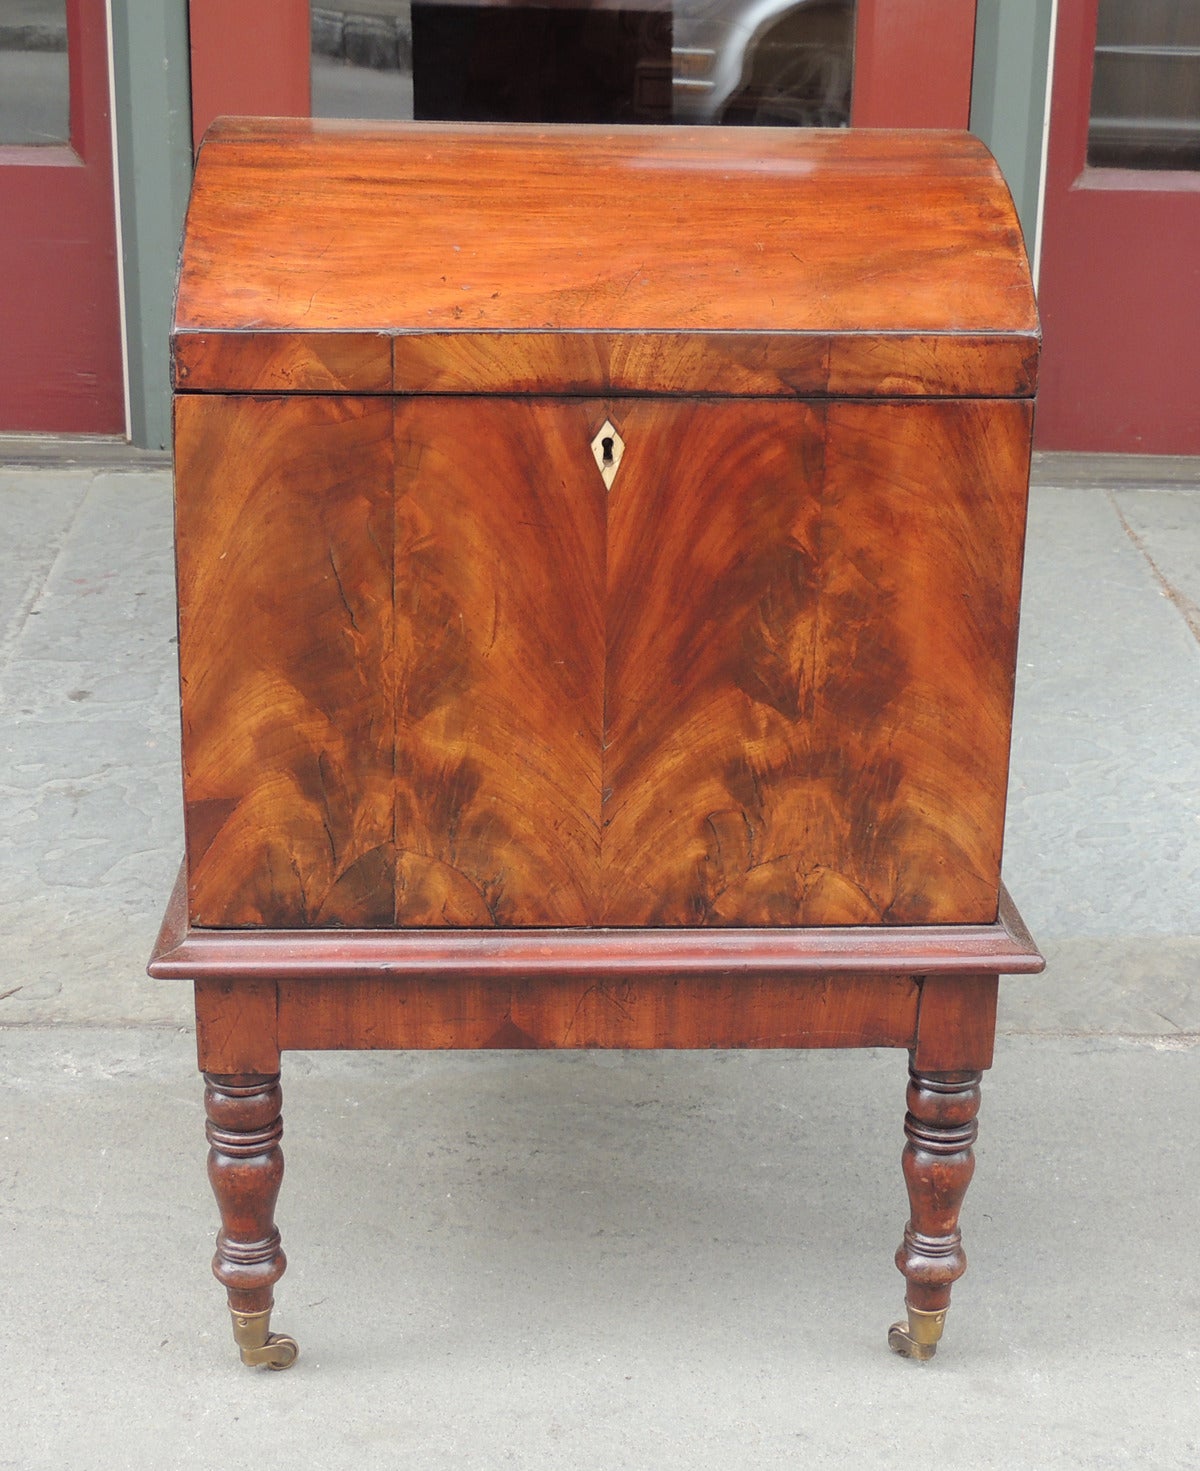 This cellarette was made in England, circa 1790. This piece is made with mahogany veneer and dil secondary woods. This cellarette features a dome top that opens to reveal nine sections for holding bottles. The bottom features a decorative lip above